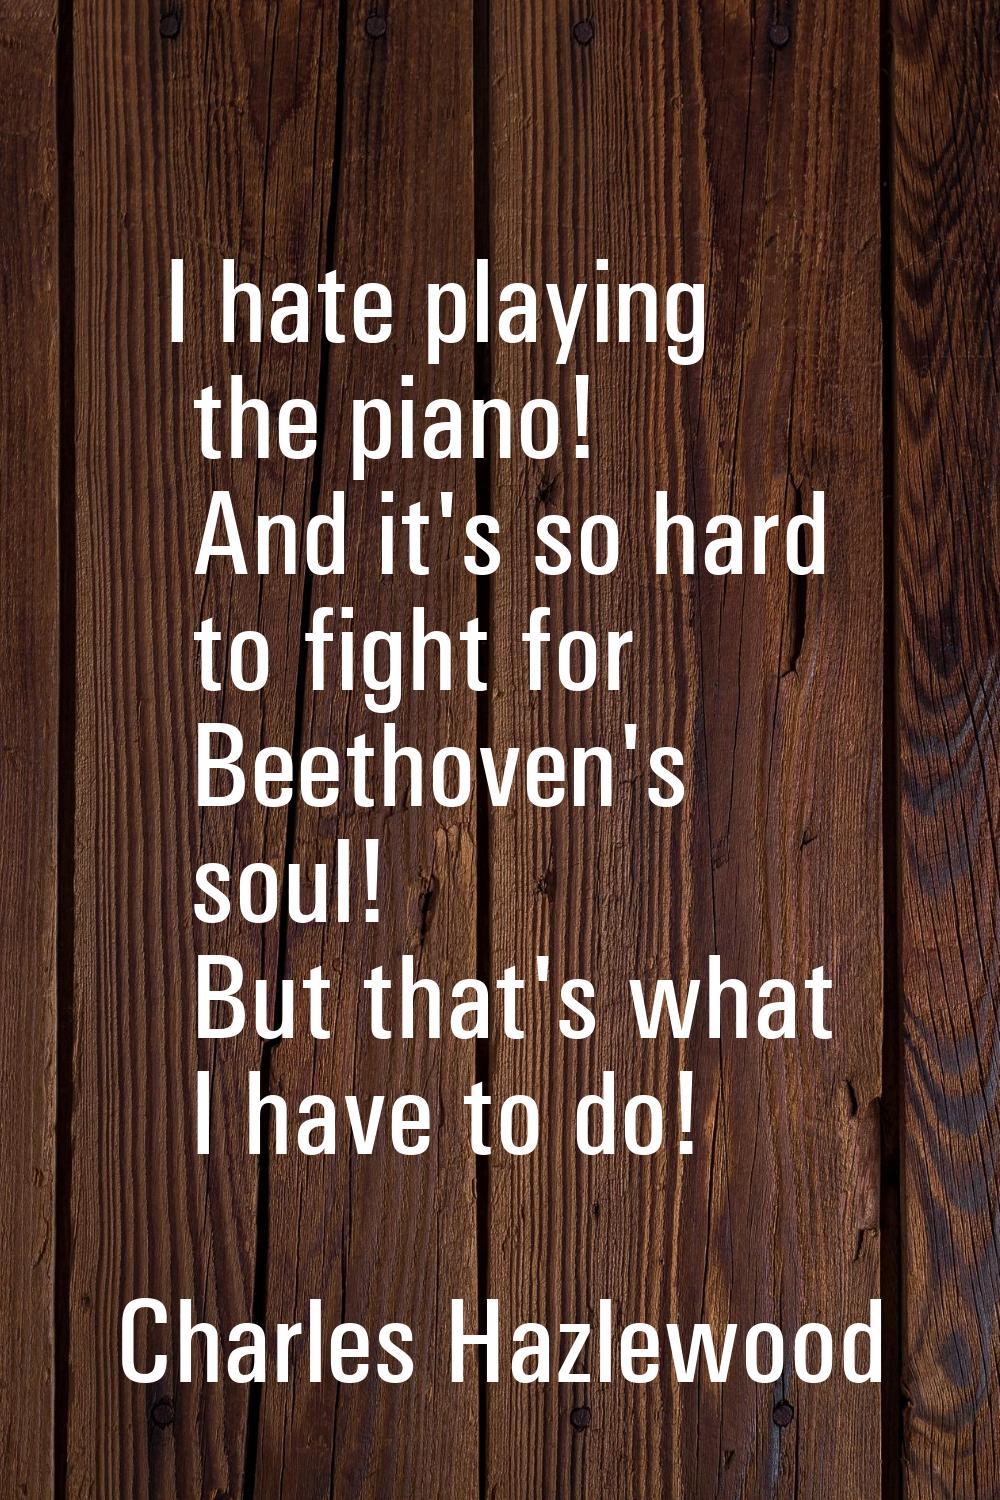 I hate playing the piano! And it's so hard to fight for Beethoven's soul! But that's what I have to